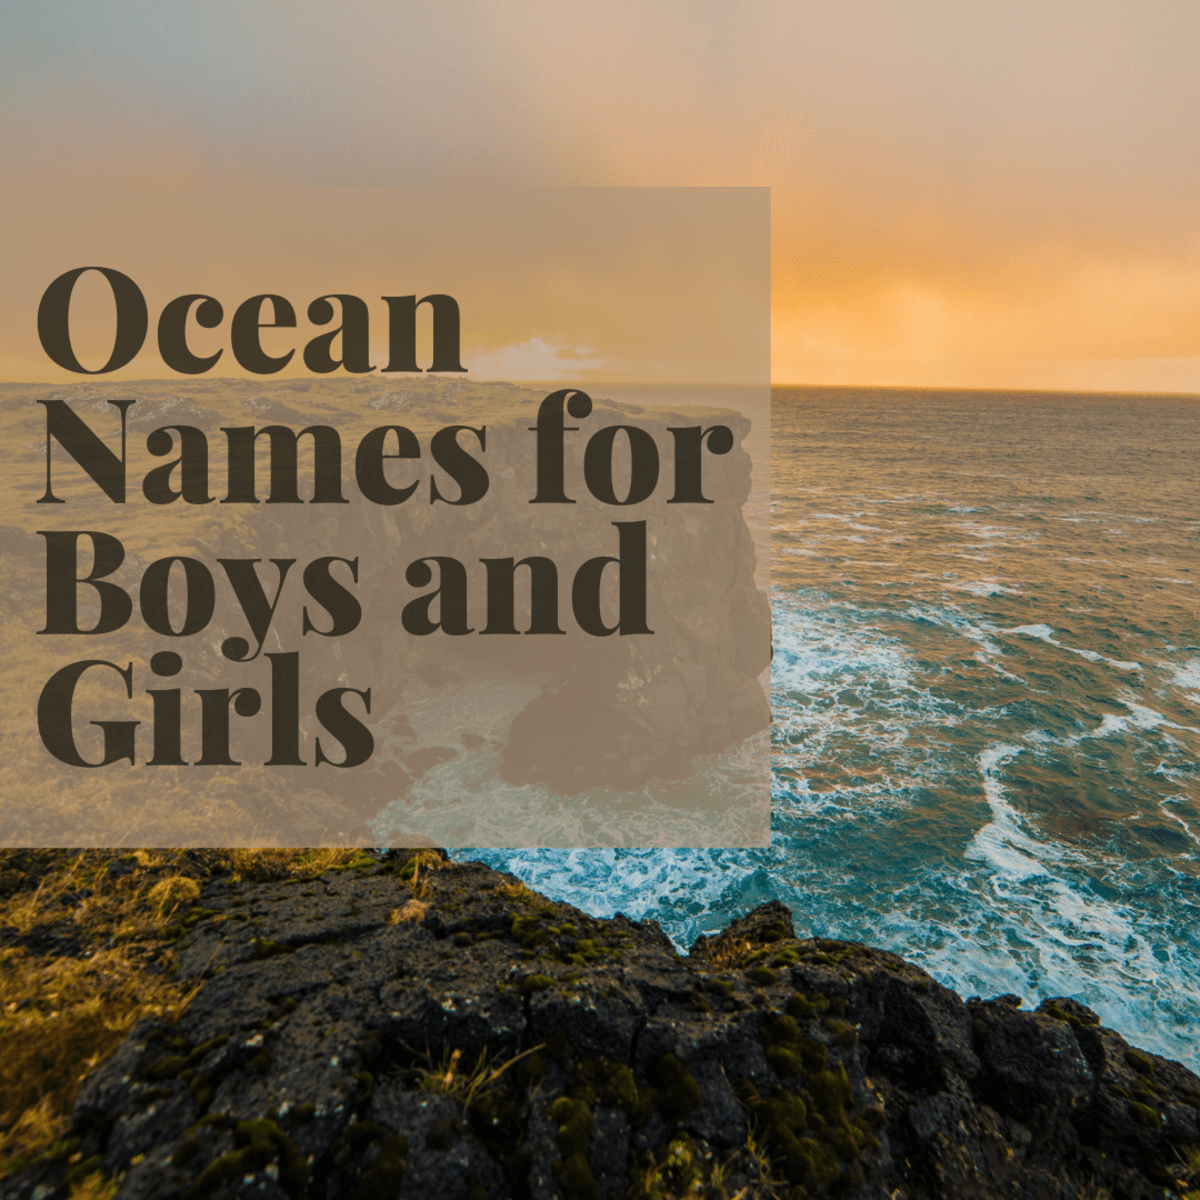 Baby names inspired by oceans - the source of all life on our planet.